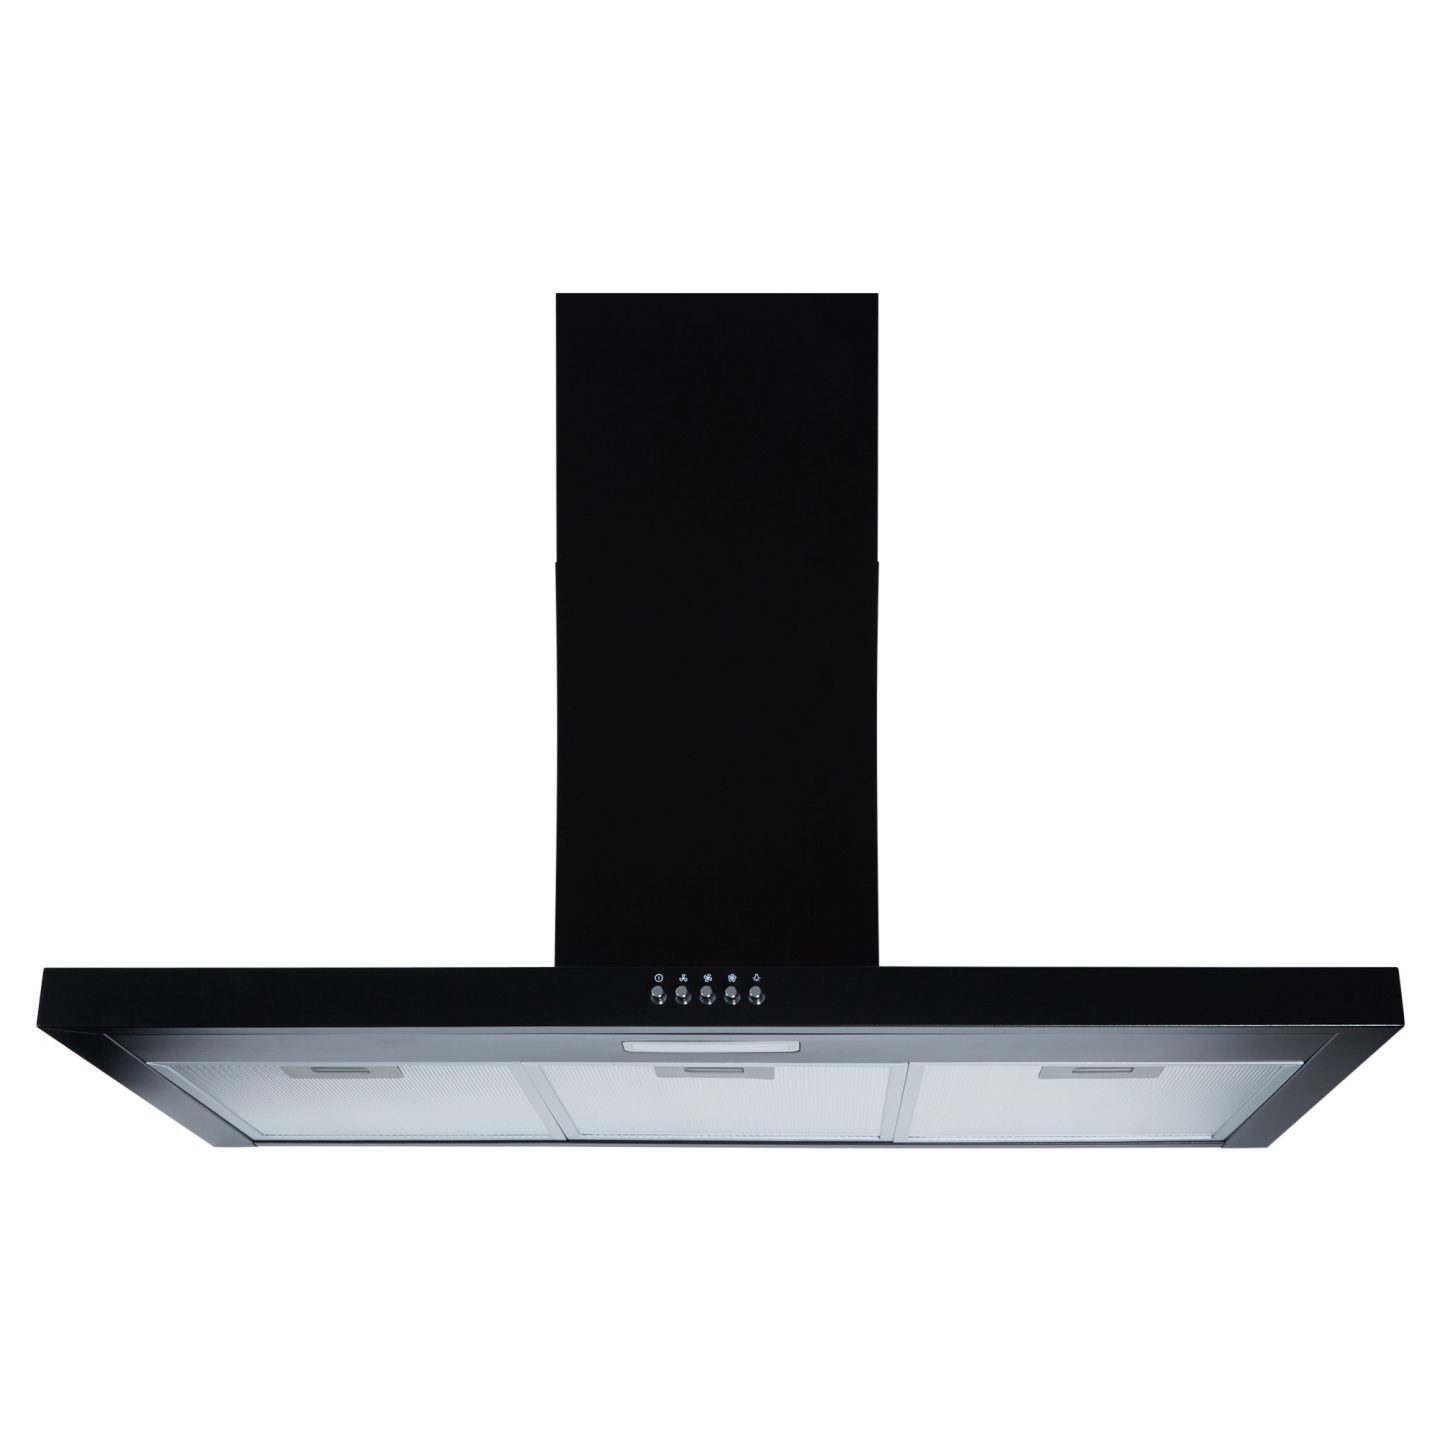 Cookology TSH900BK 90cm Kitchen Chimney cooker hood extractor fan in black with Ducting Kit